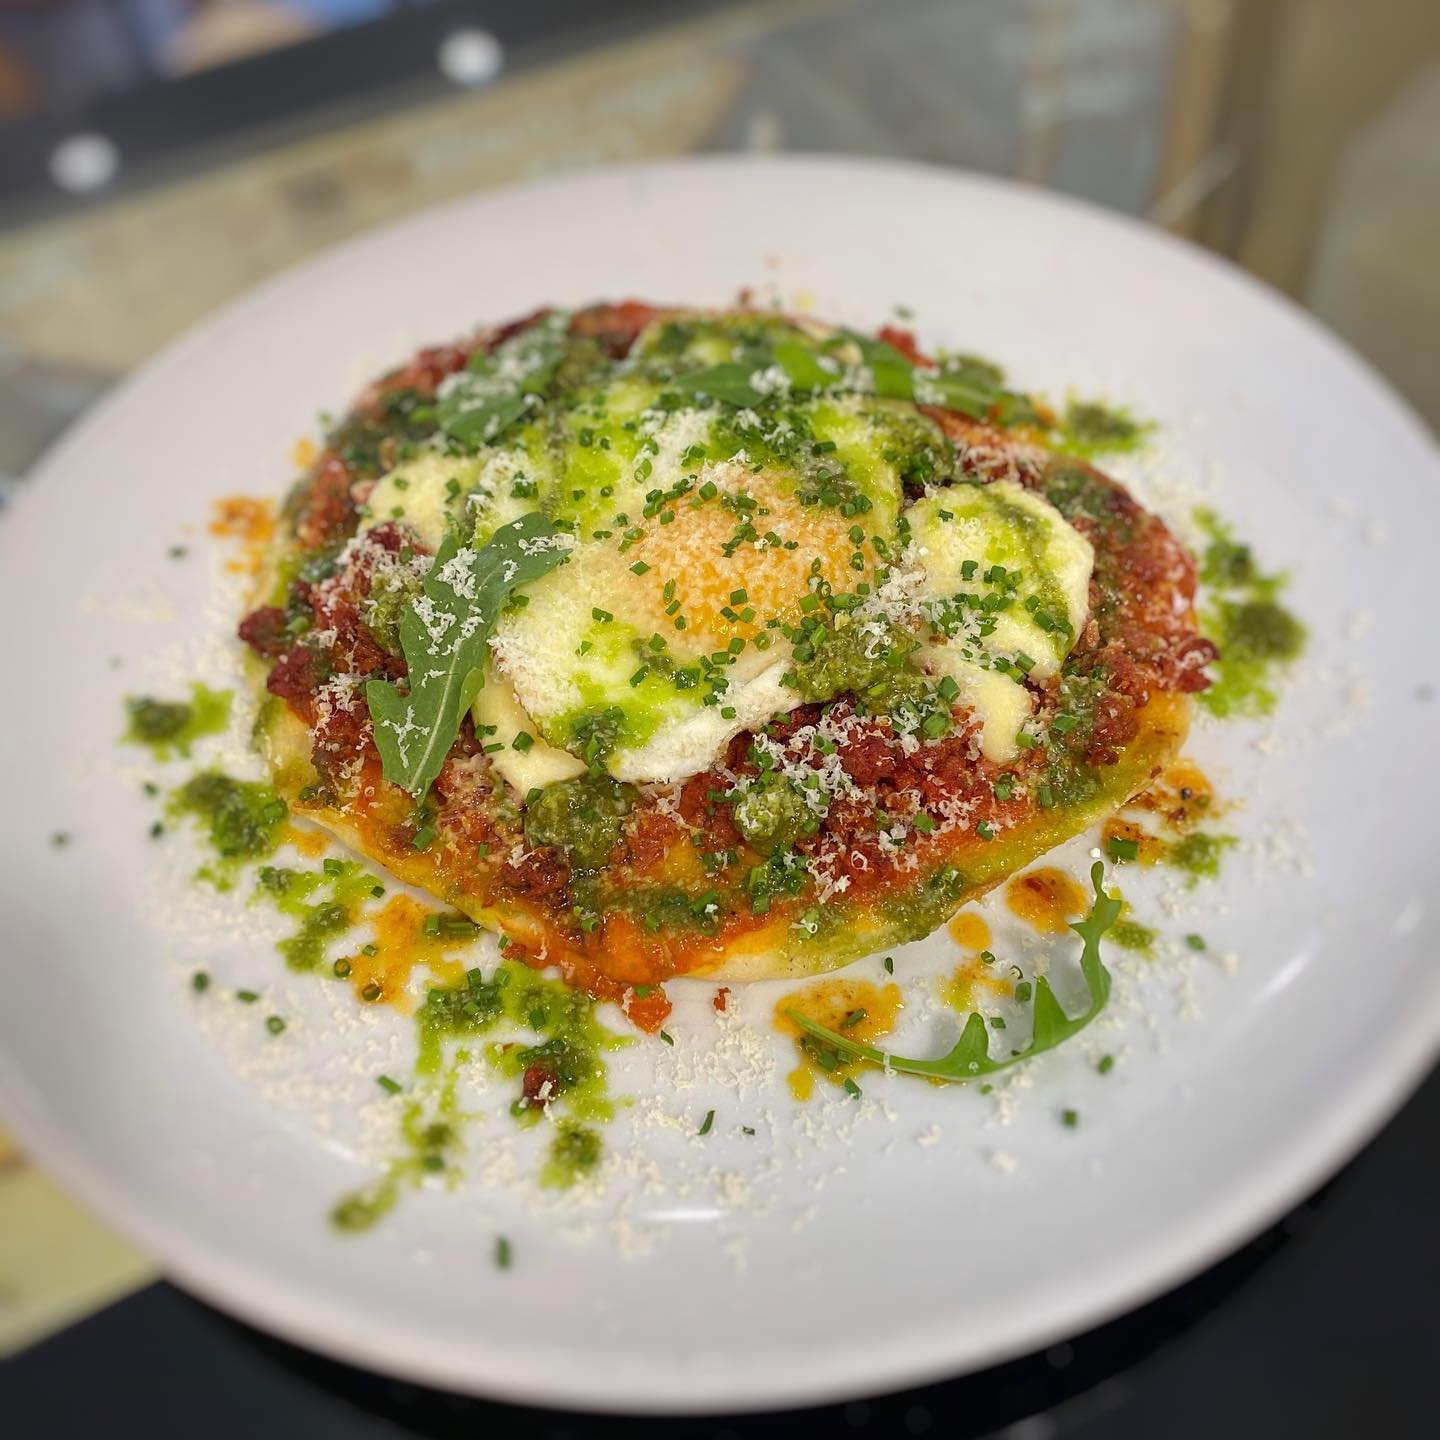 It&rsquo;s almost time for weekend brunch and we will be open 8-2pm all weekend 🙌🙌

We have yummy dishes on our menu AND we have made these delicious specials you to enjoy 👇

✨𝗖𝗛𝗢𝗥𝗜𝗭𝗢 &amp; 𝗖𝗛𝗘𝗘𝗦𝗘 𝗙𝗟𝗔𝗧𝗕𝗥𝗘𝗔𝗗✨ with
Napoli Sauce